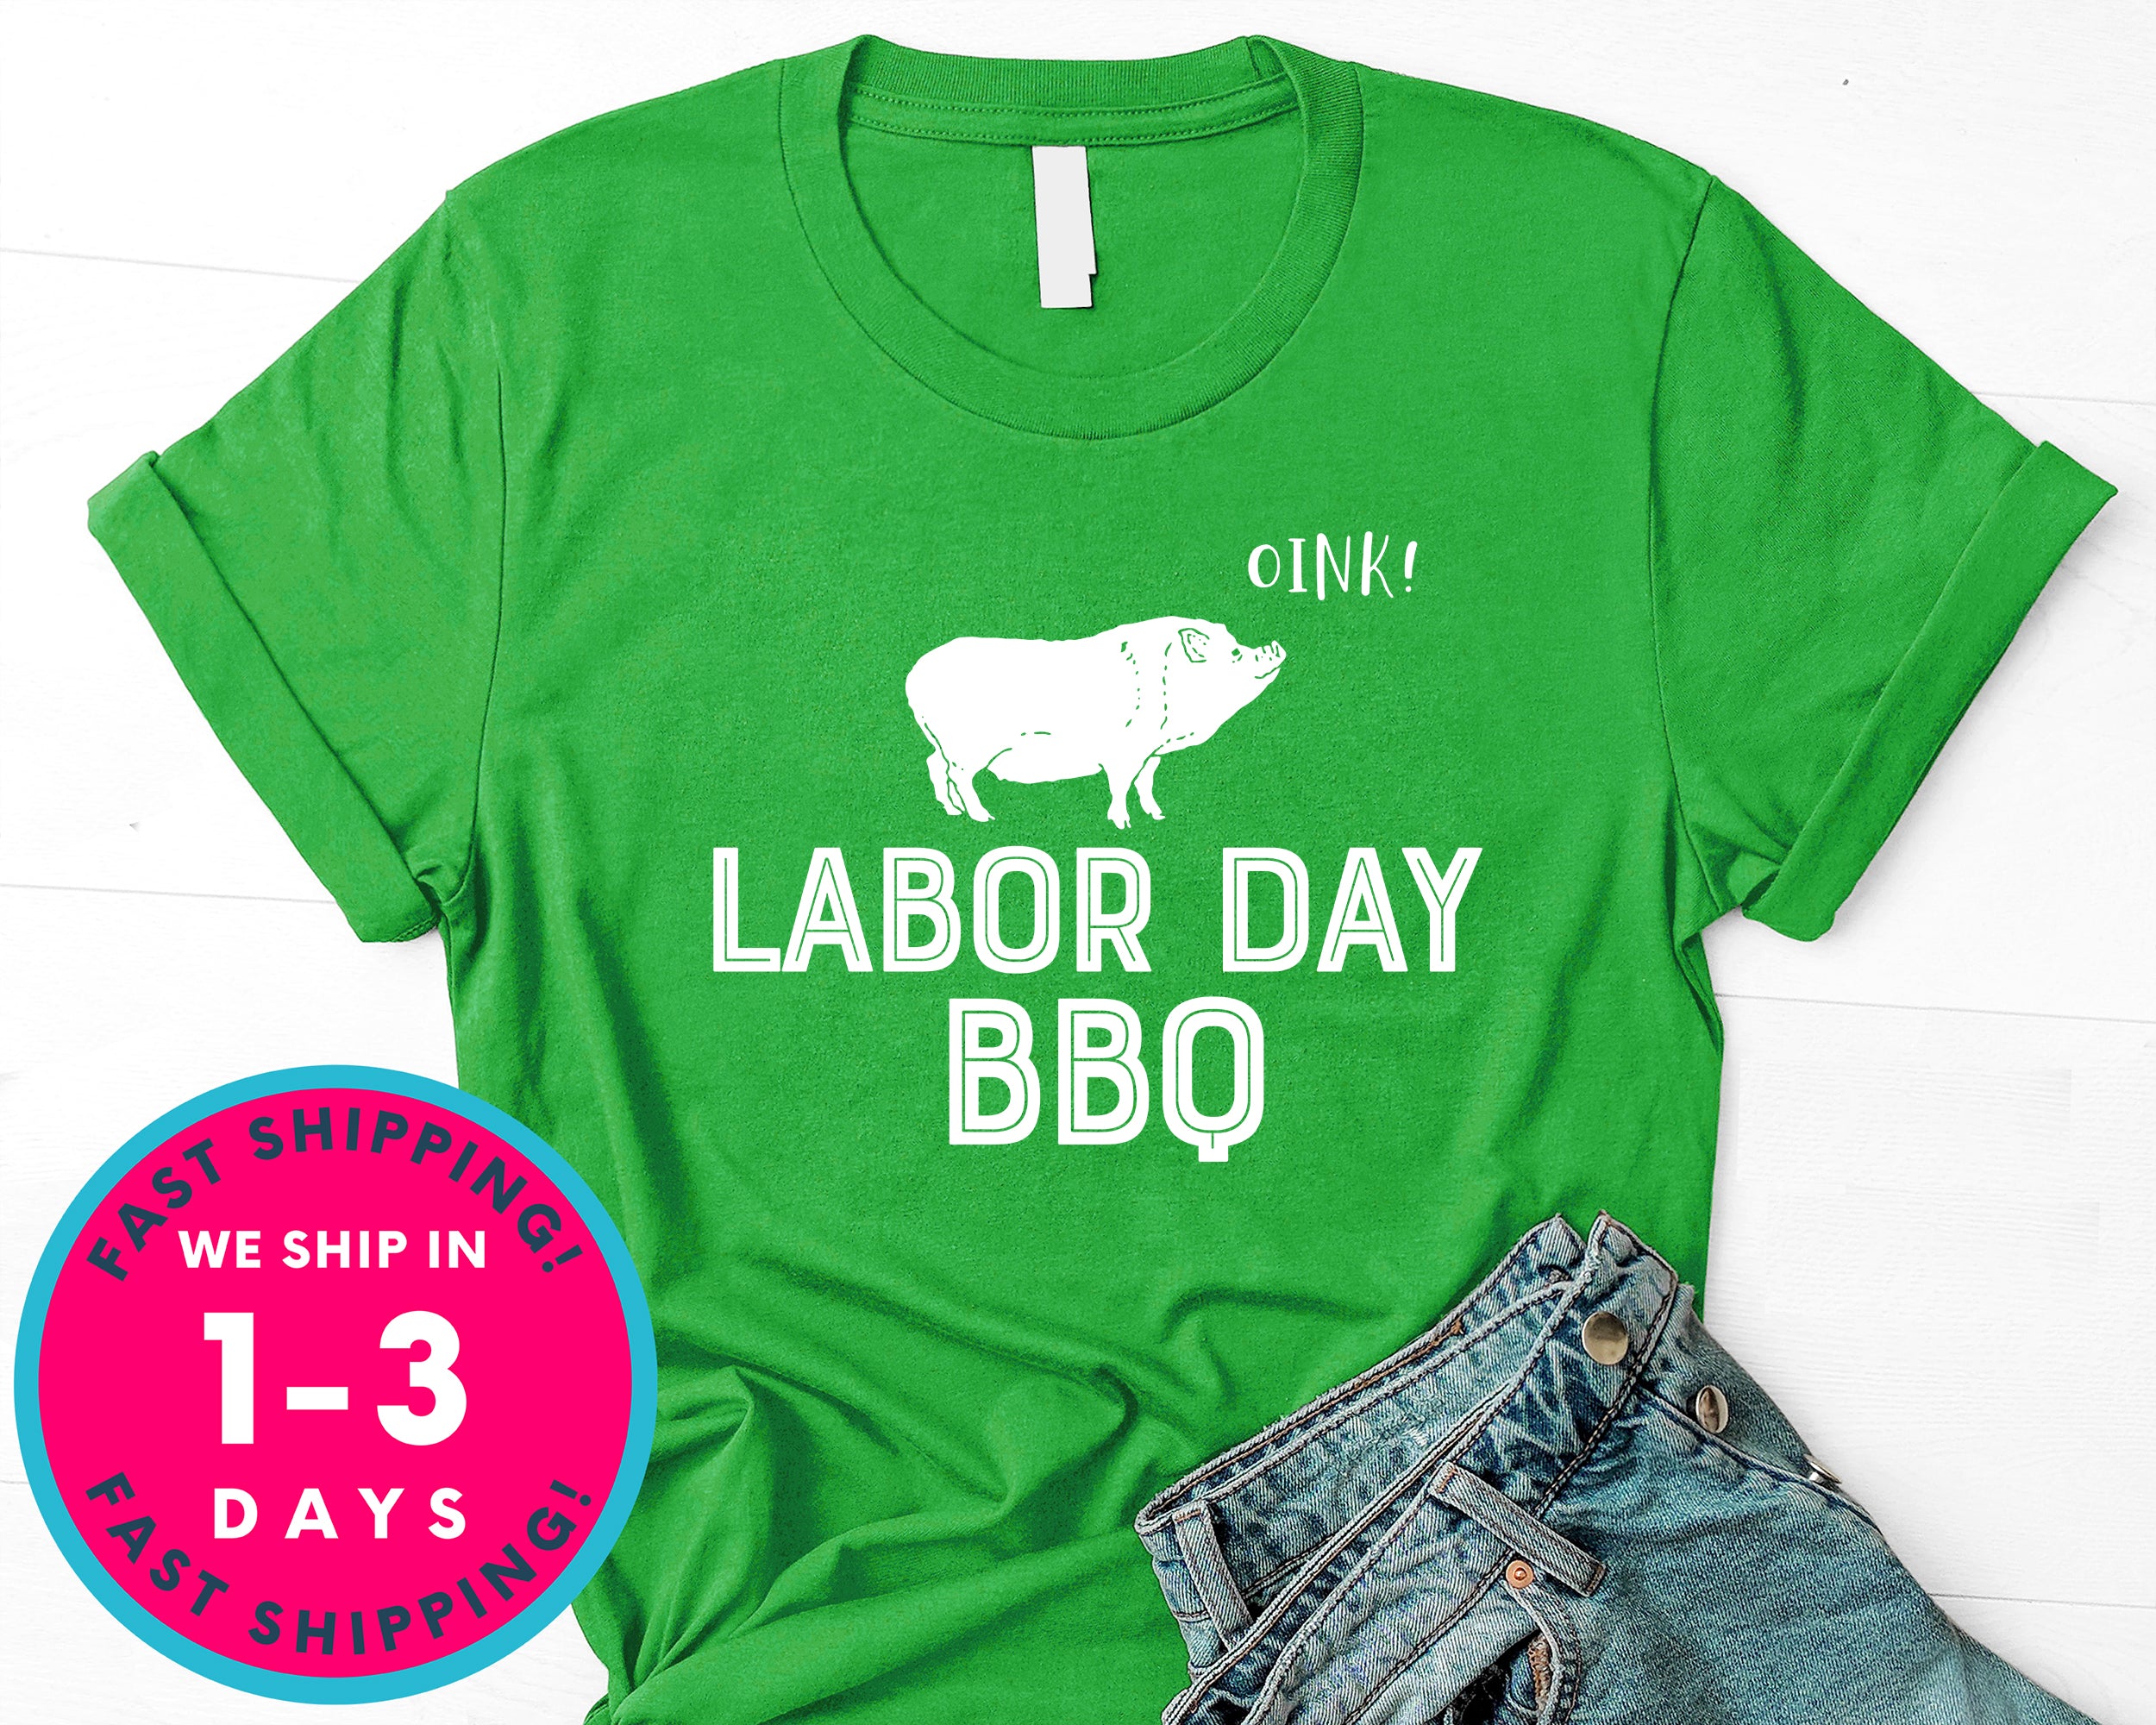 Labor Day Barbeque Bbq Oink T-Shirt - Labor Day Shirt